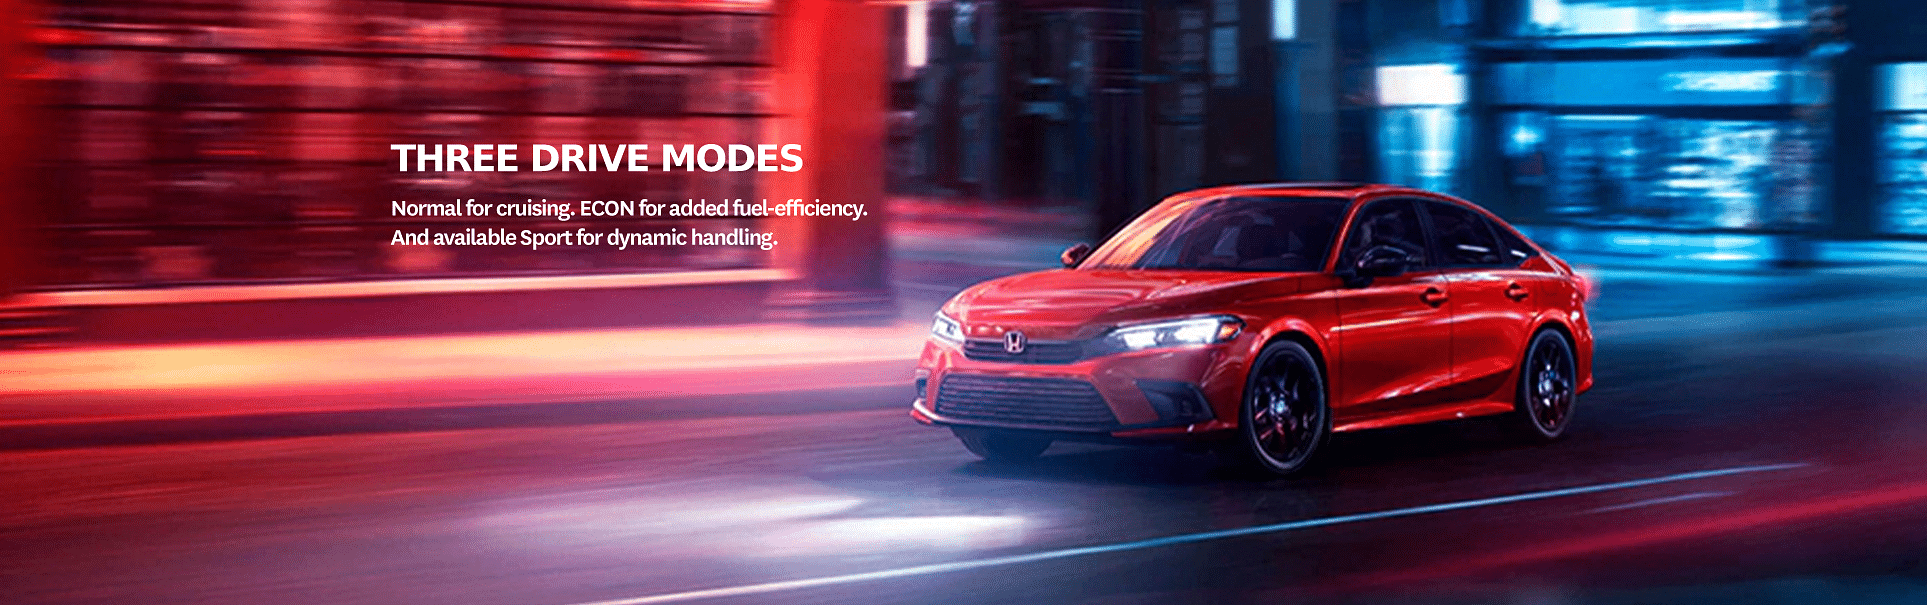 Three Drive Modes.Normal for cruising. ECON for added fuel-efficiency. And available Sport for dynamic handling.